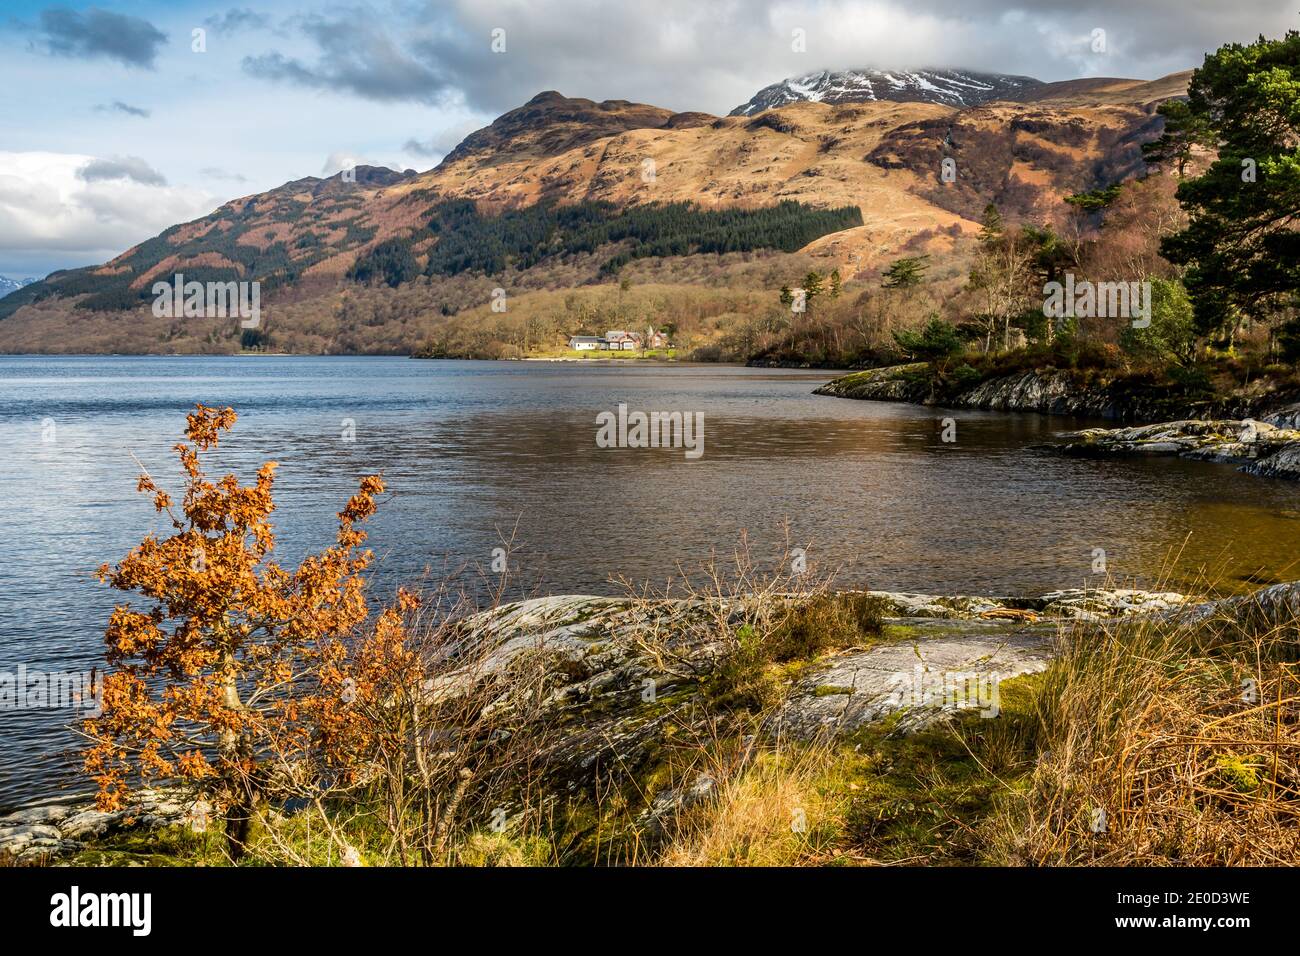 View of the eastern shore of Loch Lomond and Ben Lomond from Rowardennan, Scotland, Uk Stock Photo